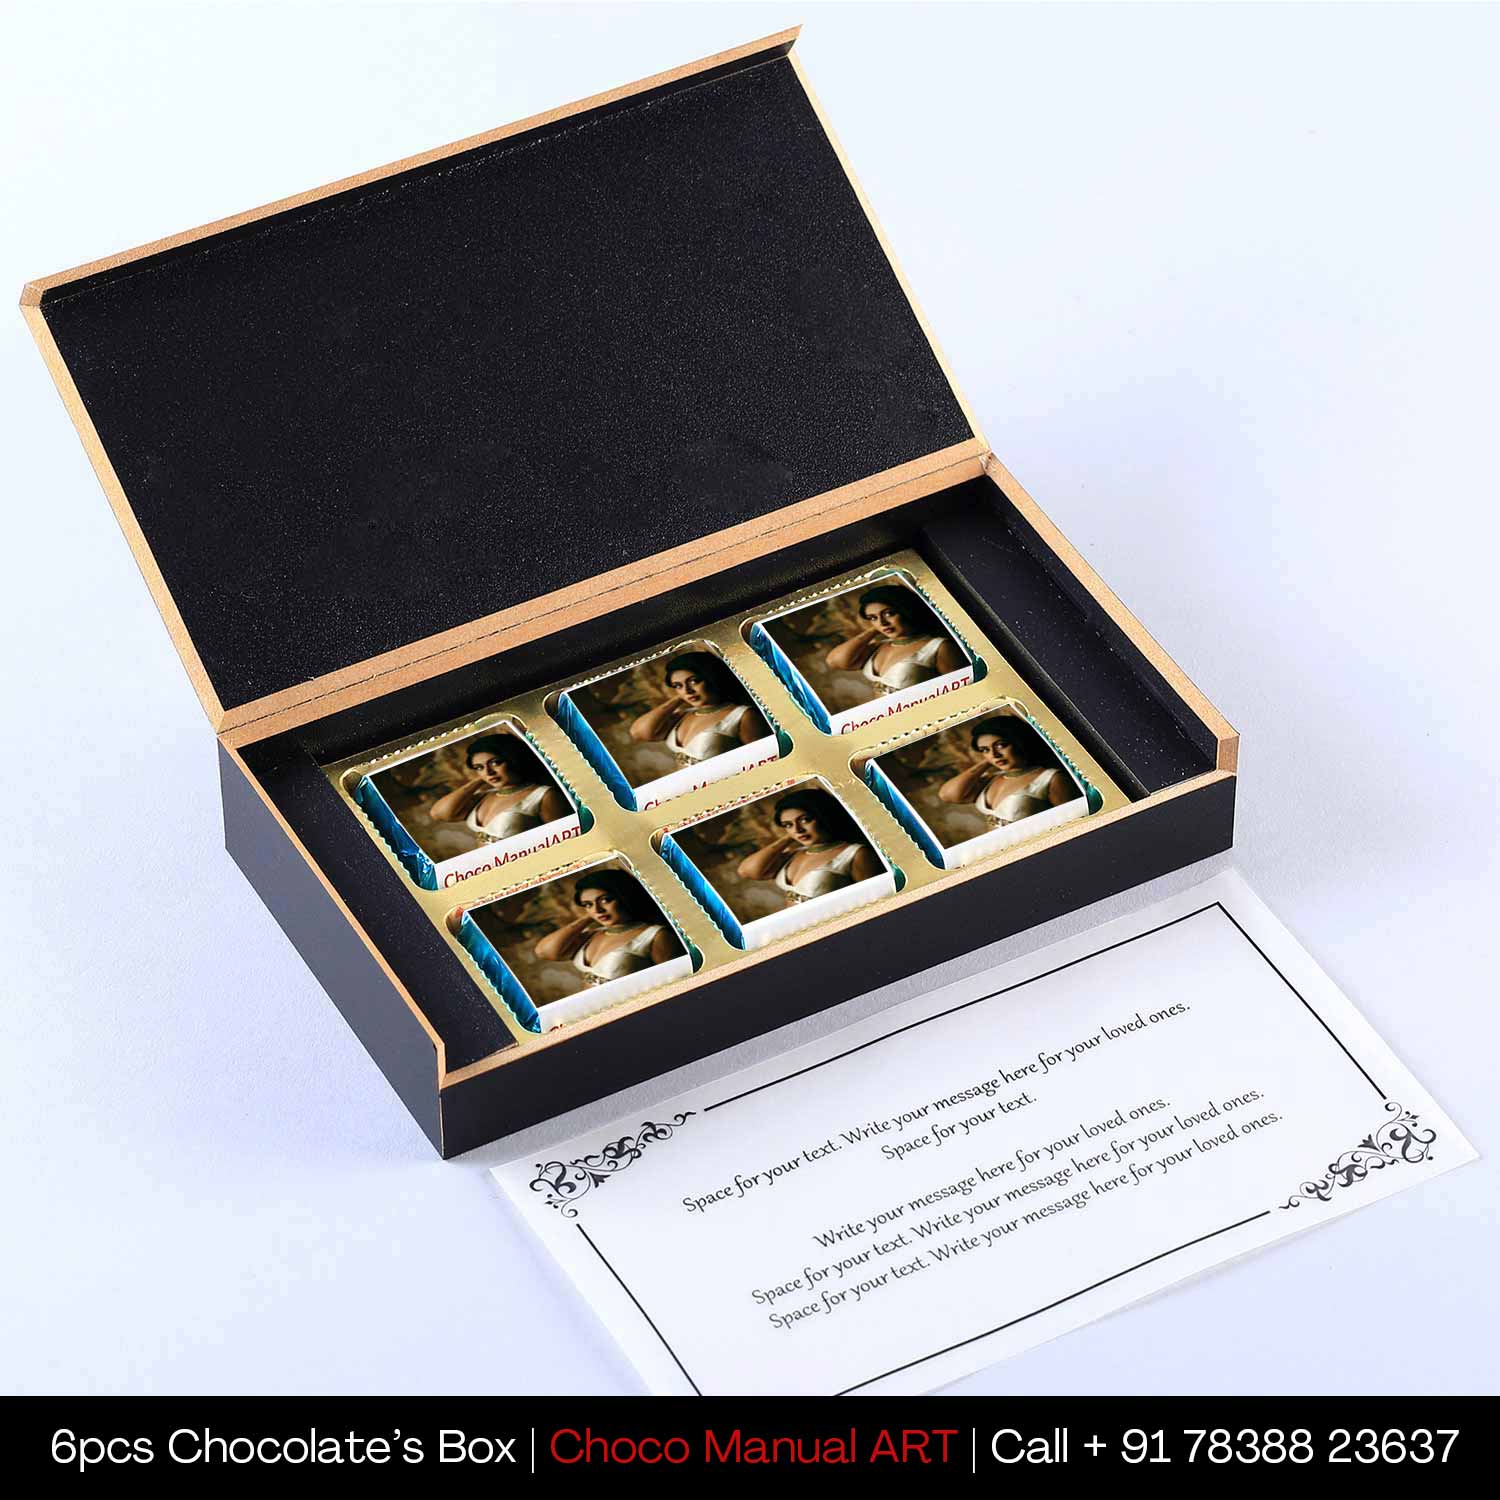 Thanks to friend I  Delicious chocolates I  Image/Name printed chocolate box I  Elegant wooden packaging I  Free shipping across India